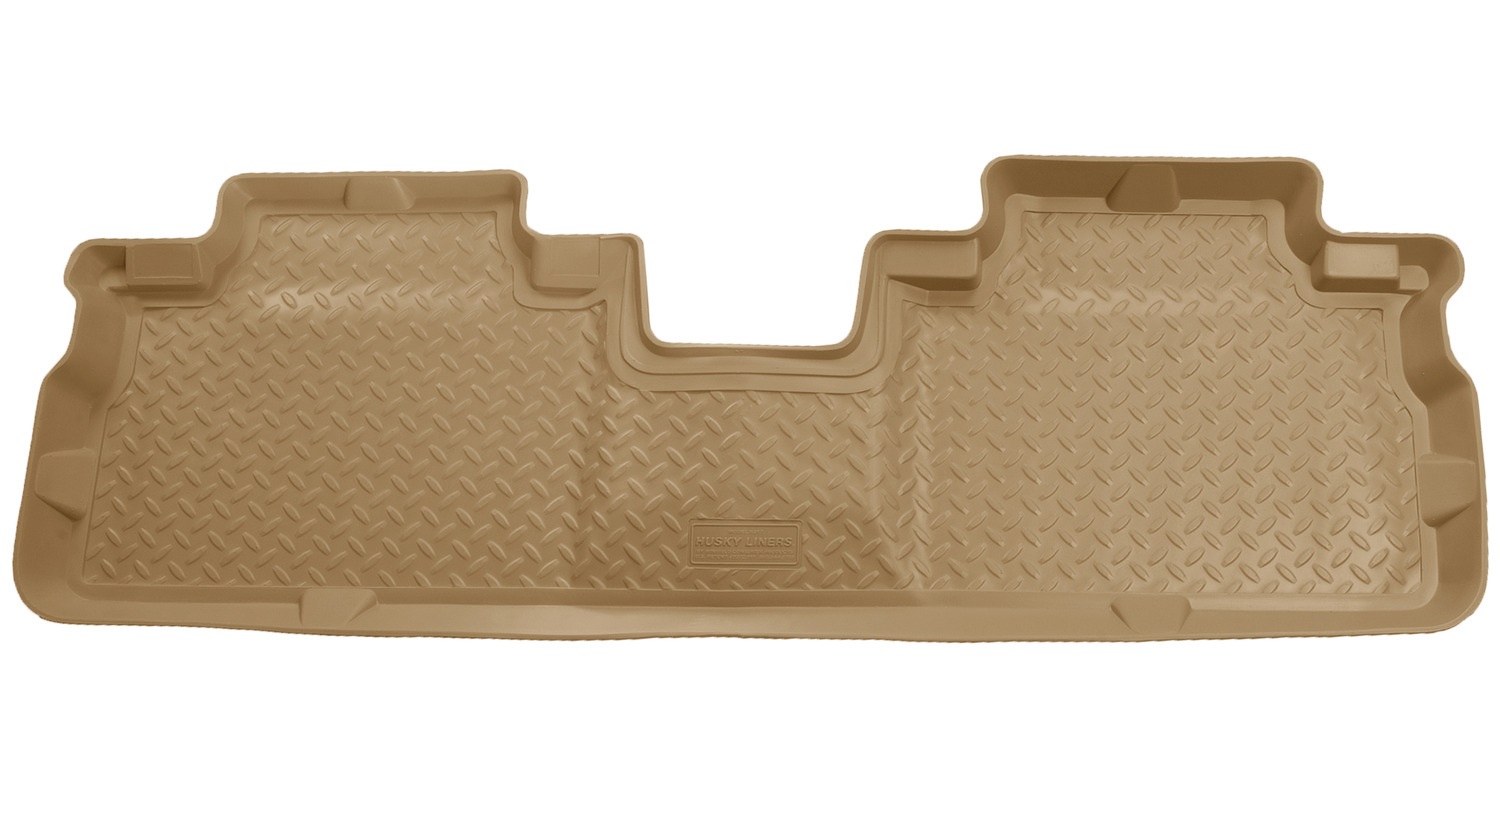 Husky Liners Husky Liners 63173 Classic Style; Floor Liner Fits 05-08 Escape Mariner Tribute